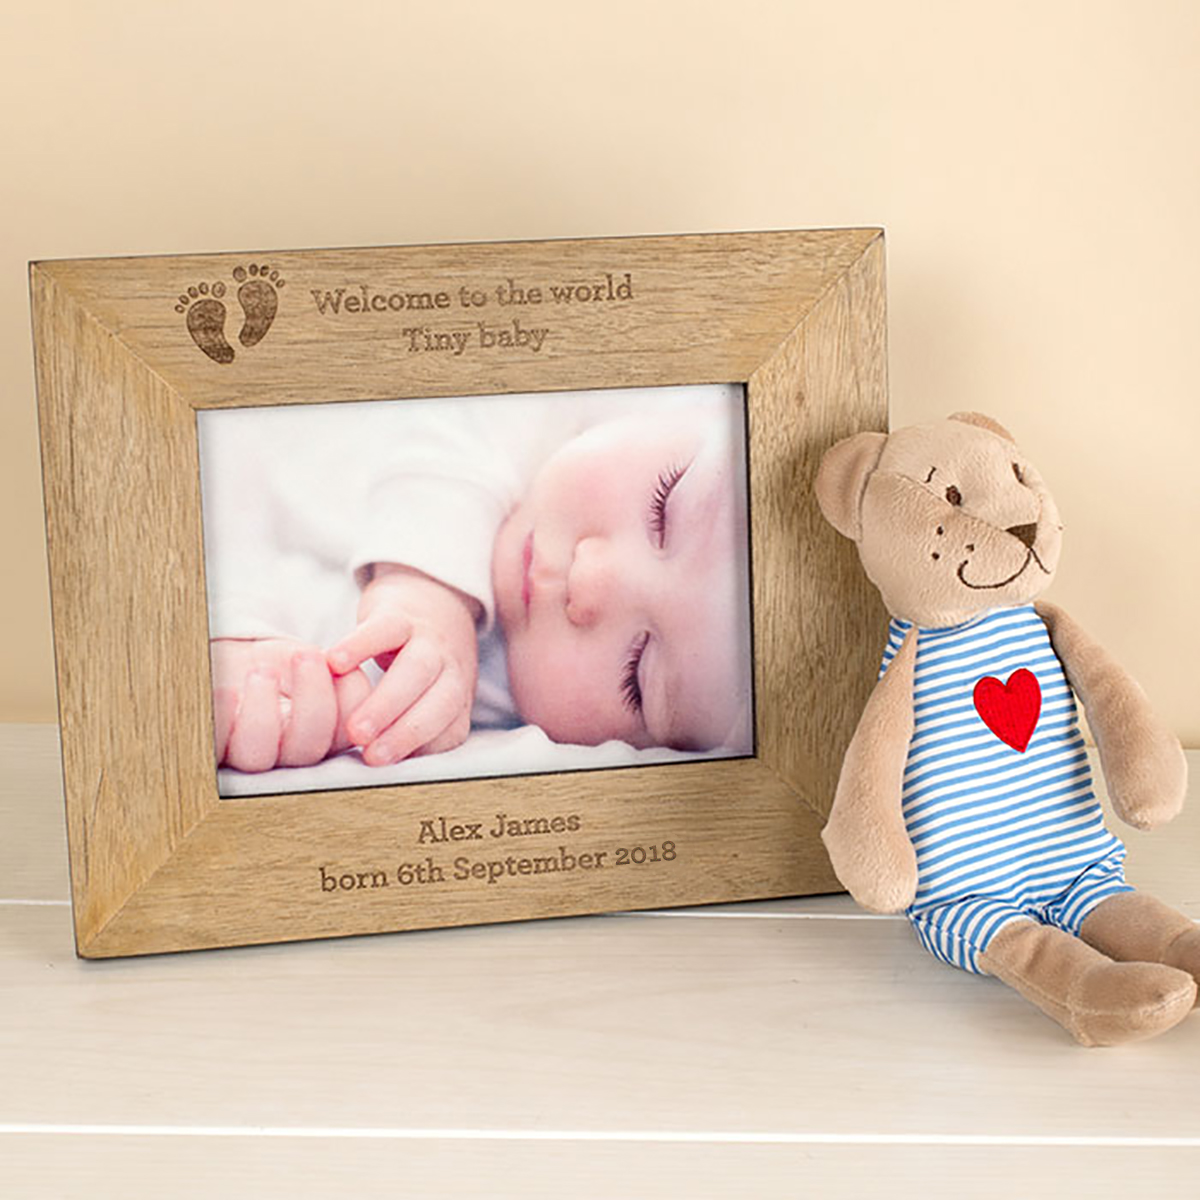 Personalised Engraved Wooden Photo Frame - Baby's Footprints